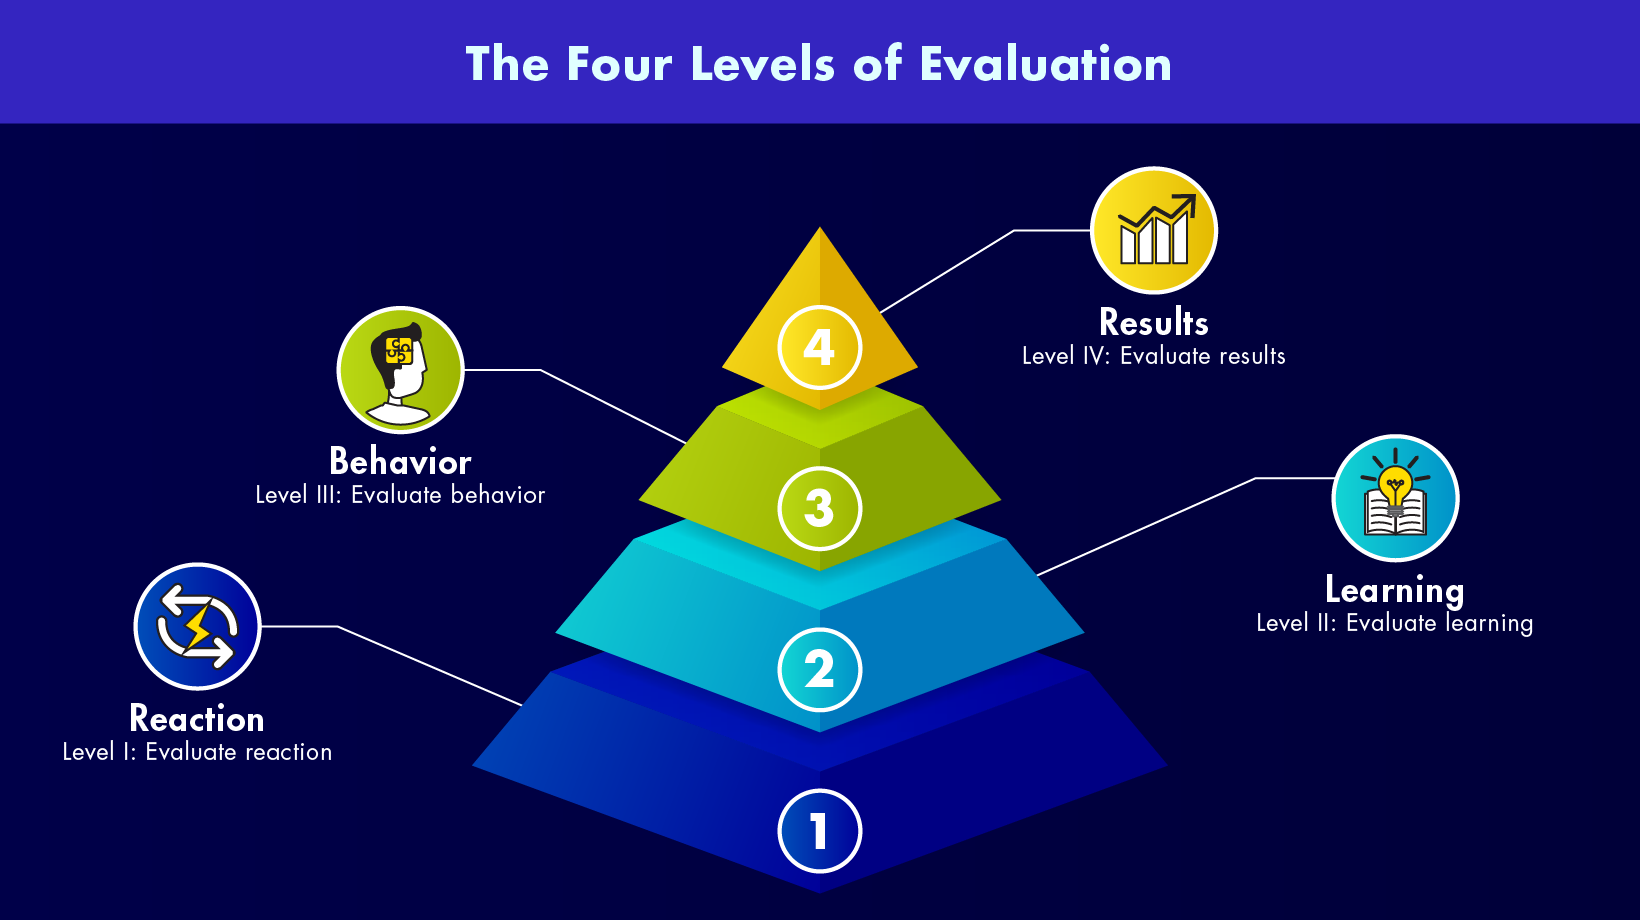 The four levels of evaluation